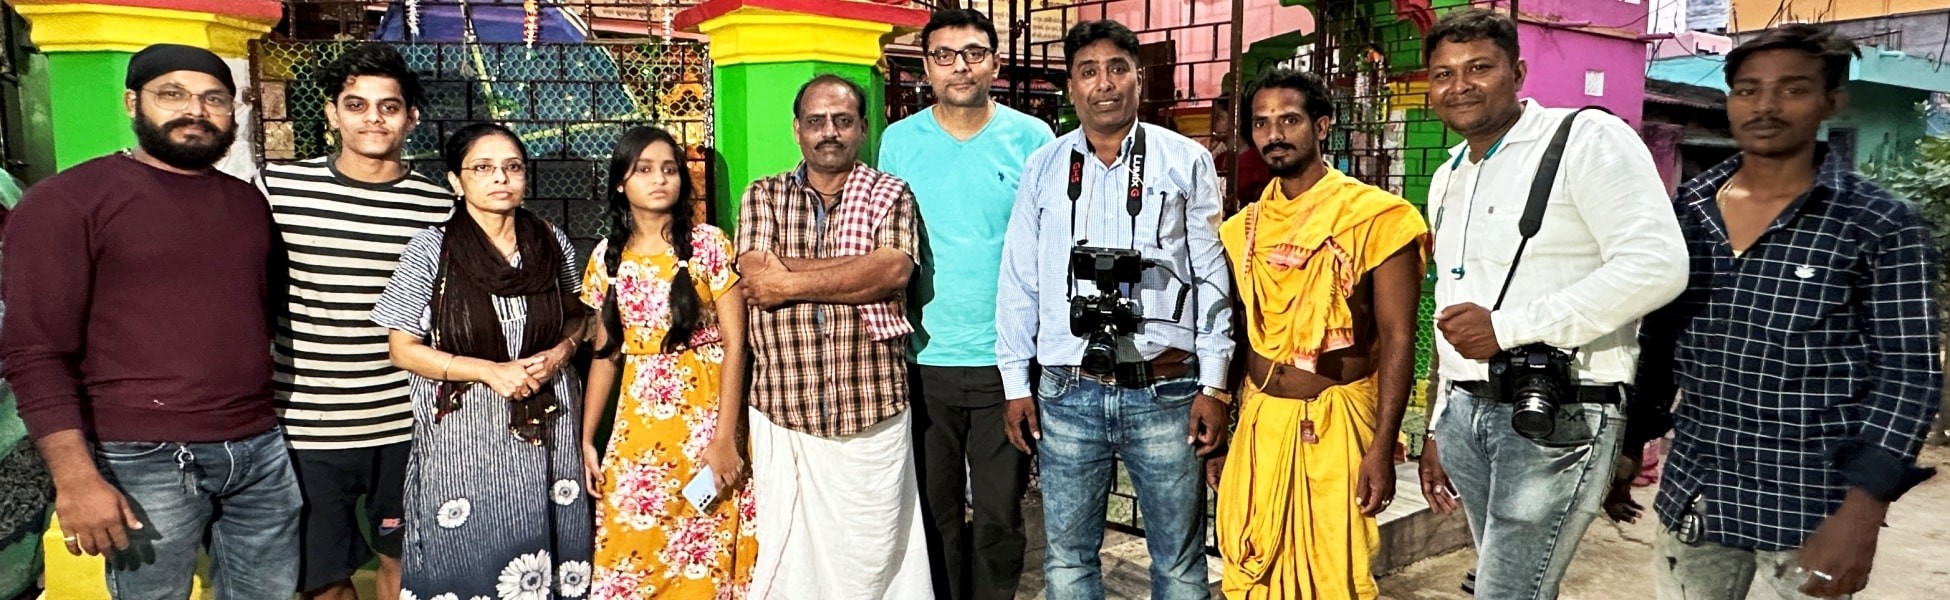 film production house in Dharashiv, video production house in Dharashiv, tv production house in Dharashiv, production house in Dharashiv, film production company in Dharashiv, video production company in Dharashiv, tv production company in Dharashiv, production company in Dharashiv